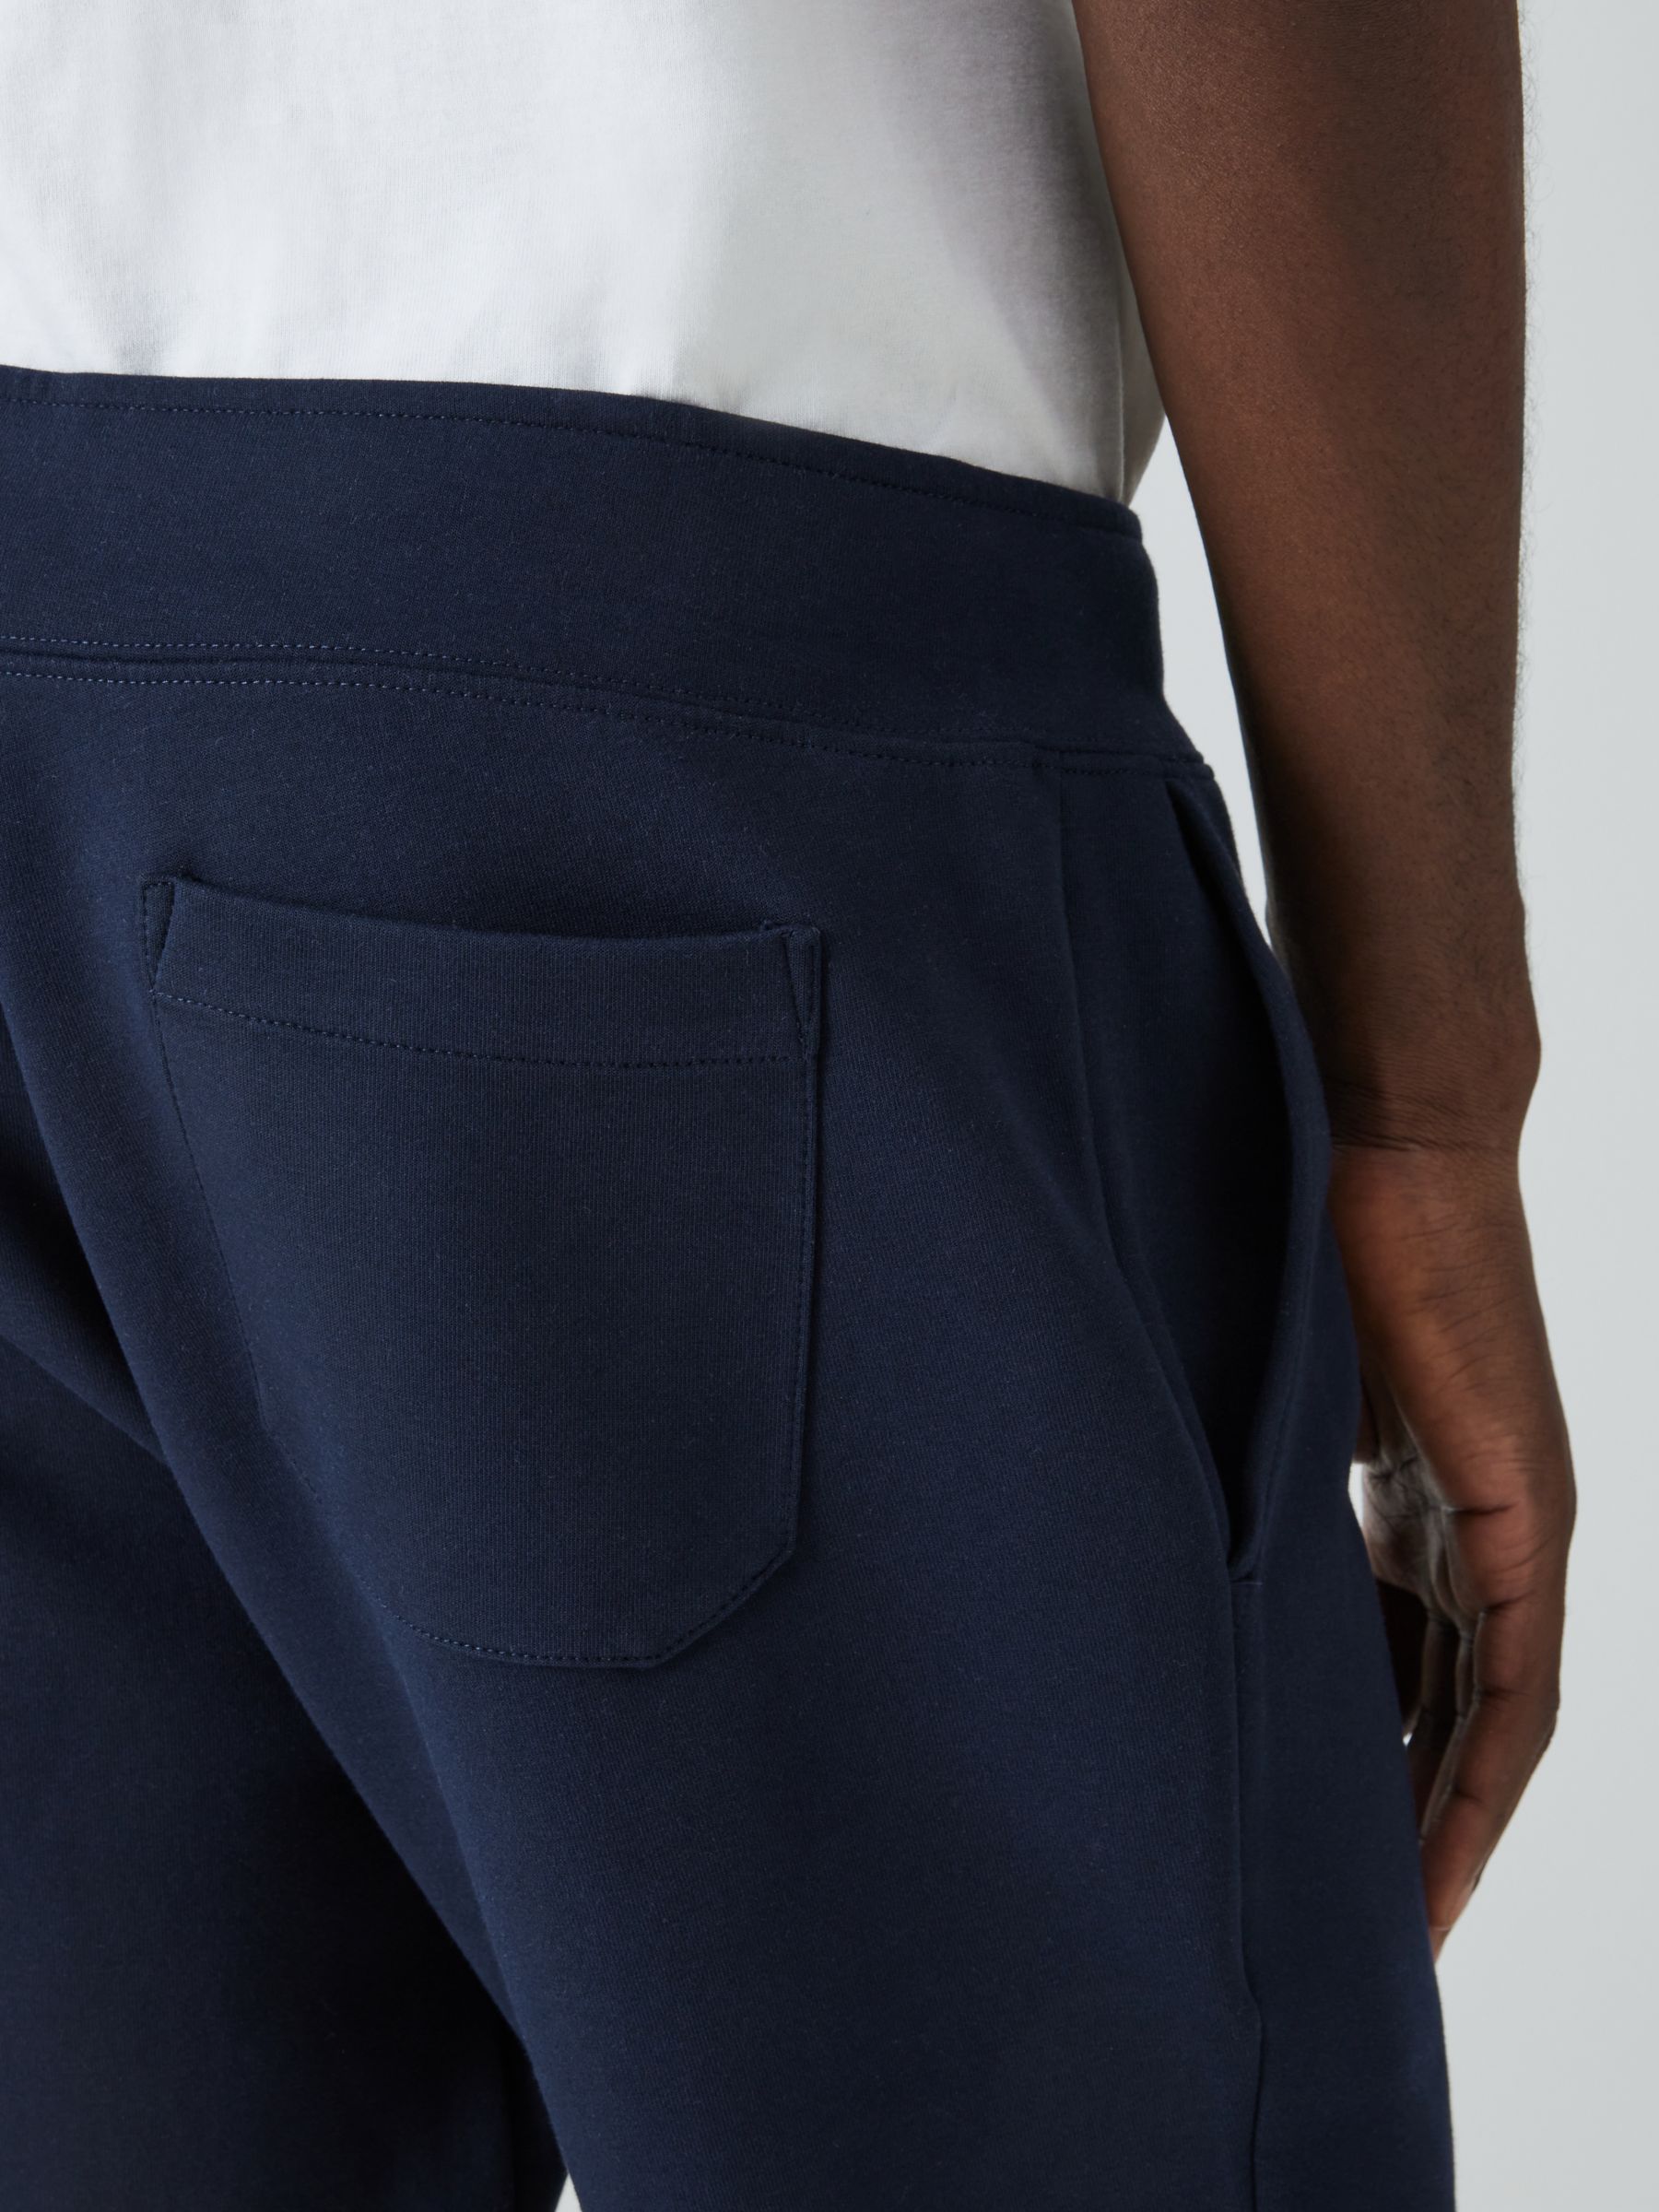 Buy Polo Ralph Lauren Double Knit Trousers Online at johnlewis.com